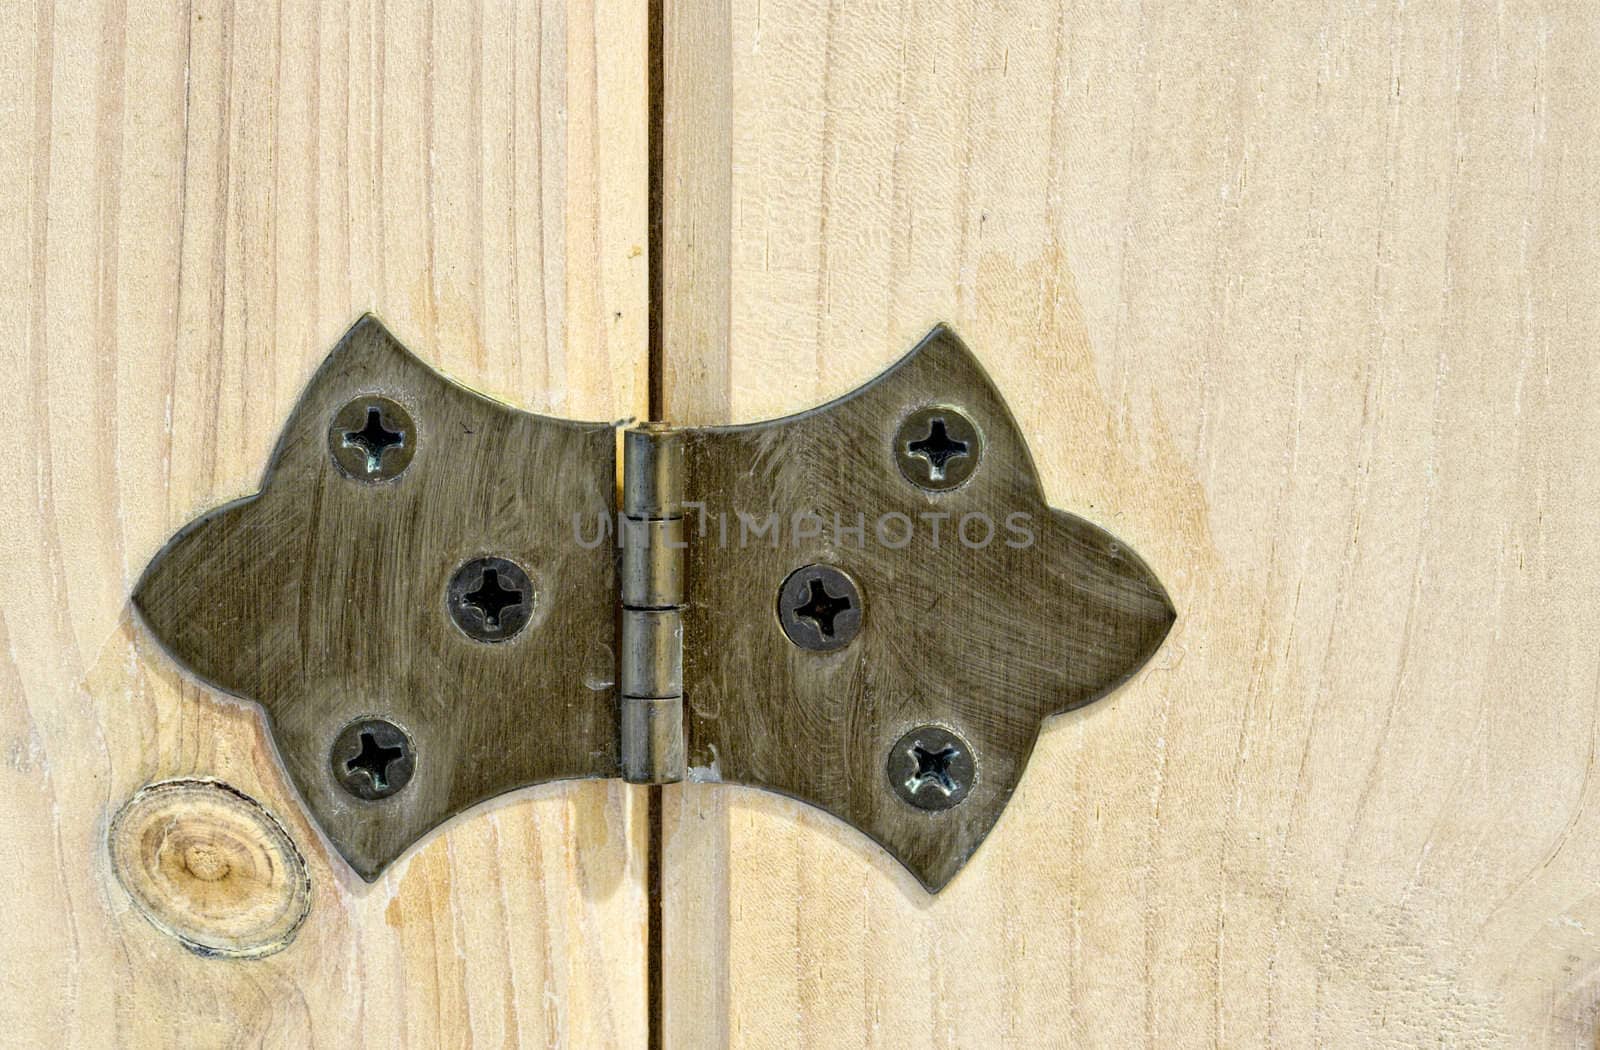 A close up view of a hinge attached to a wood cabinet door. Much detail can be seen in both the hinge and the wood.